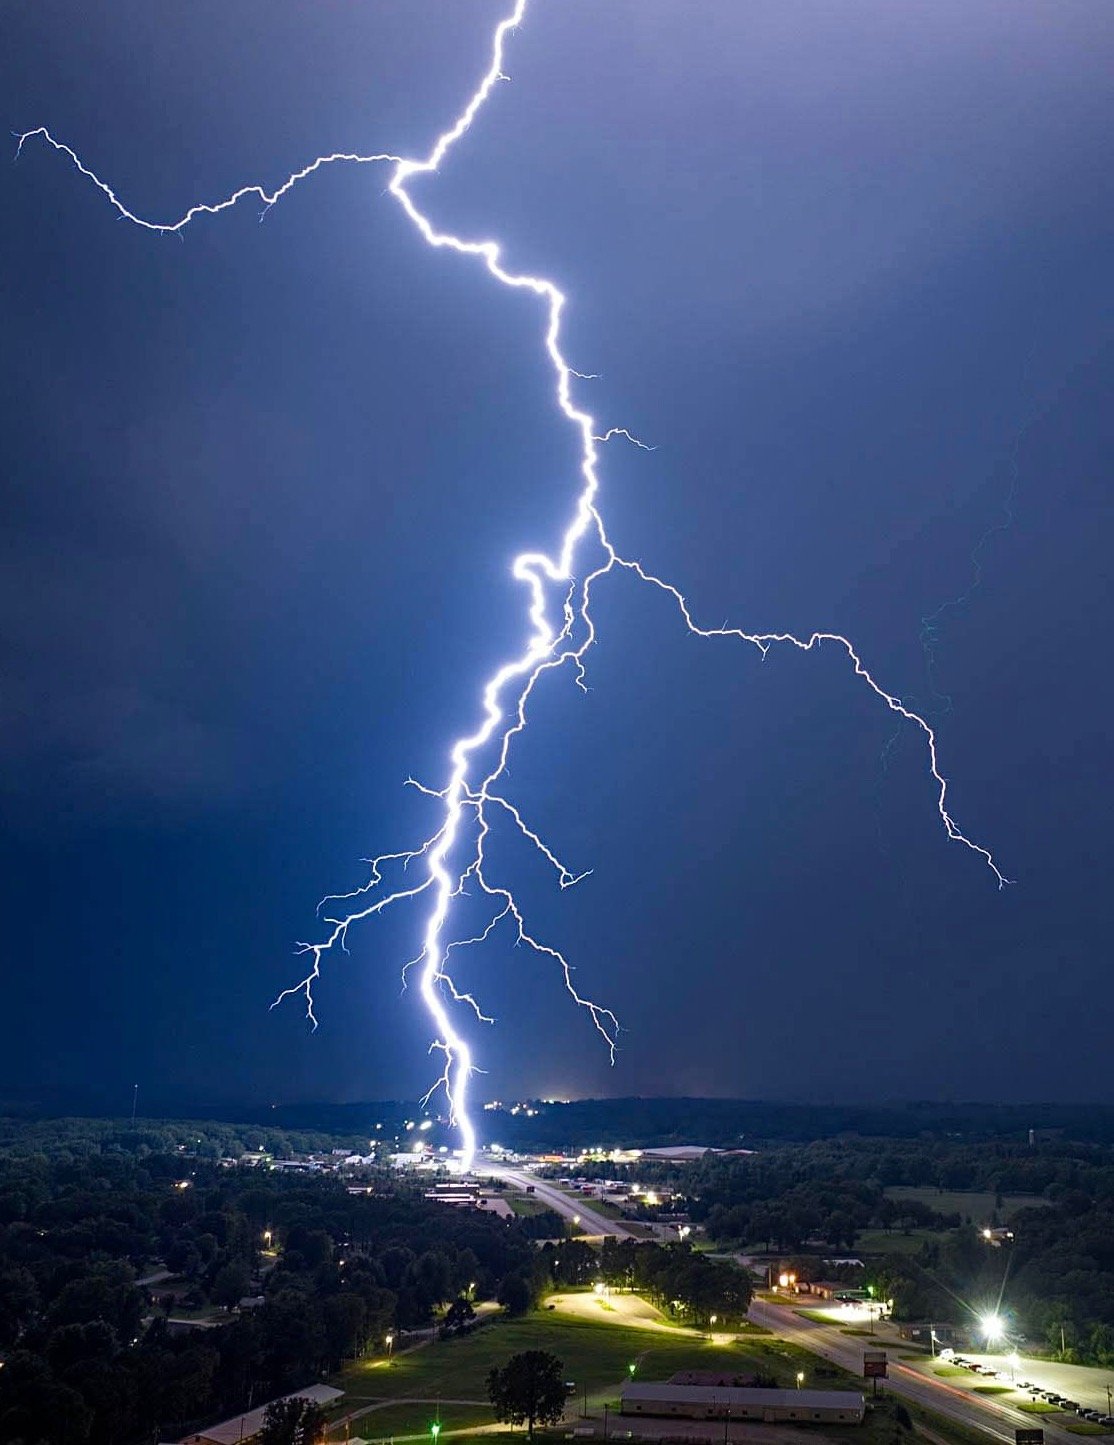 Damon Platt of Tulsa, Okla., had been visiting relatives in West Plains Saturday evening and was headed back to Oklahoma when storms blew into Howell County, bringing heavy lightning and rain. This photo was taken with a Mavick 3 drone Platt takes with him while traveling, and captures a lightning strike that appears to have hit a parking lot off of north U.S. 63 across from the Ozark Regional Stockyards. For more of Platt’s photography, including other weather photos, visit his Damon’s Droneography Facebook page at www.facebook.com/damonsdrone.